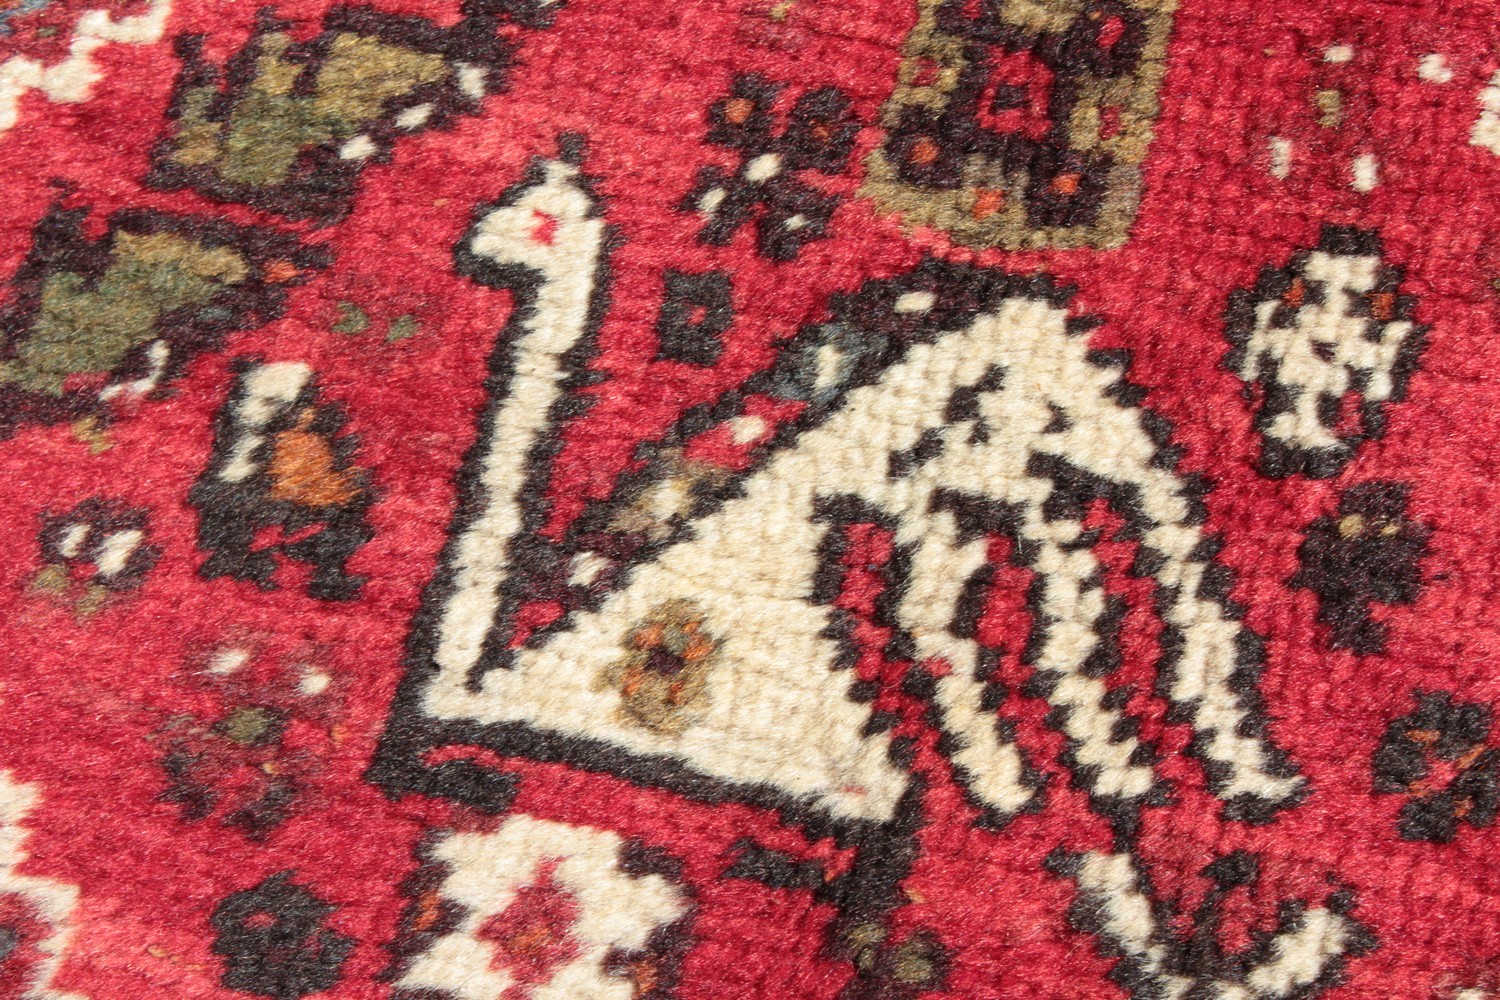 A PERSIAN TRIBAL SHIRAZ QASHQAI CARPET with a large motif on a red ground. 11ft 6ins x 5ft 6ins. - Image 2 of 8